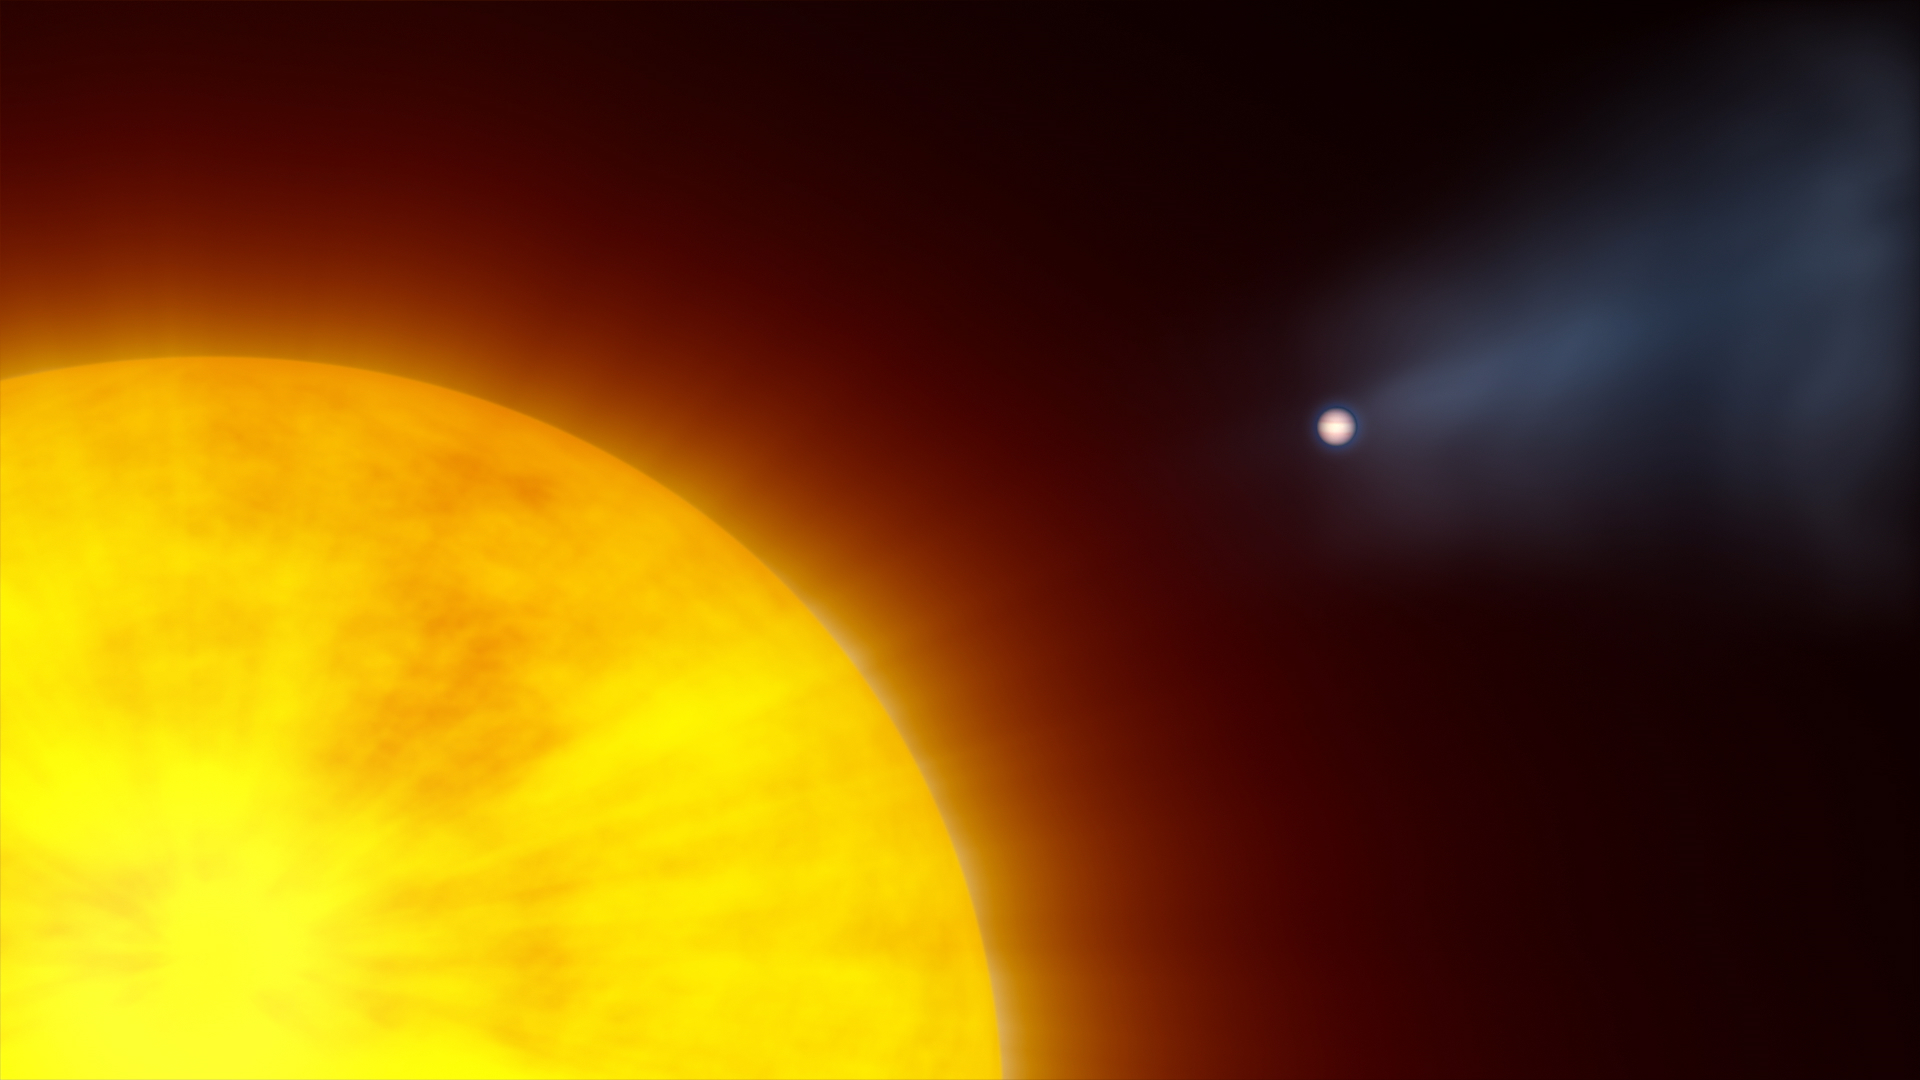 Preview Image for HD 189733b Exoplanet Animation